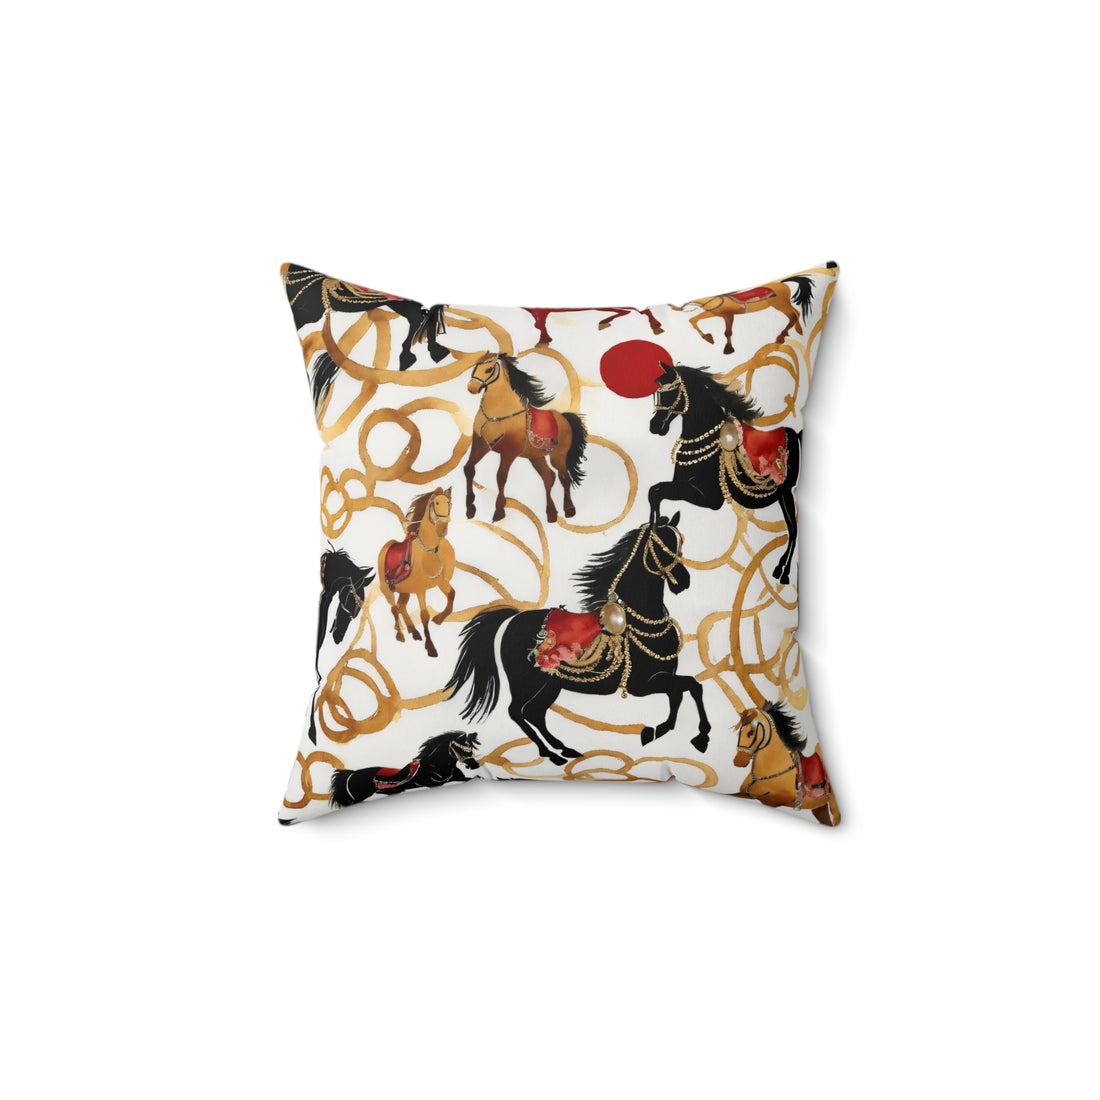 Equine Chainlink Elegance Spun Polyester Square Pillow